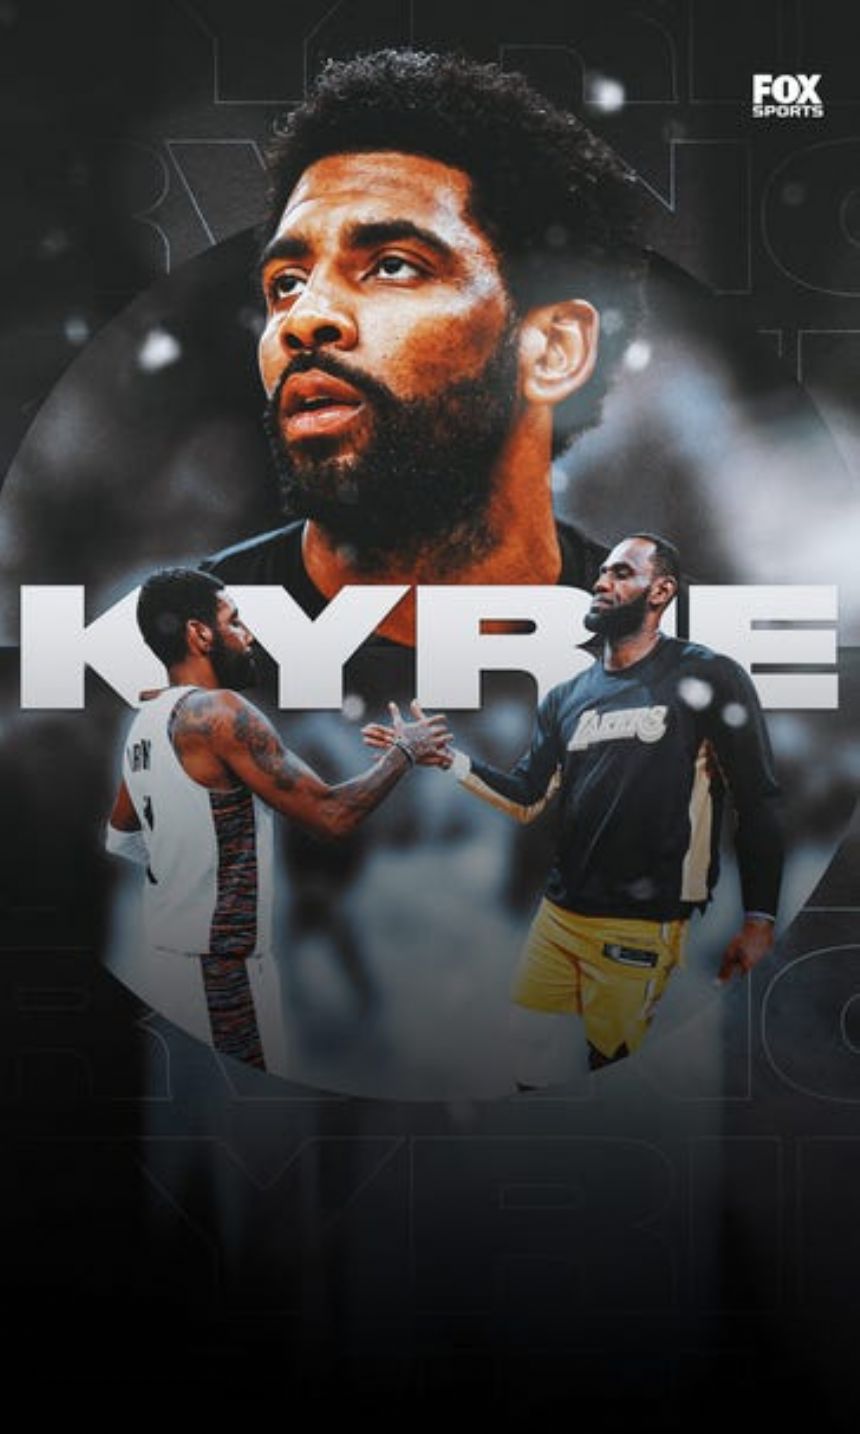 Could Kyrie Irving reunite with LeBron James on Lakers?